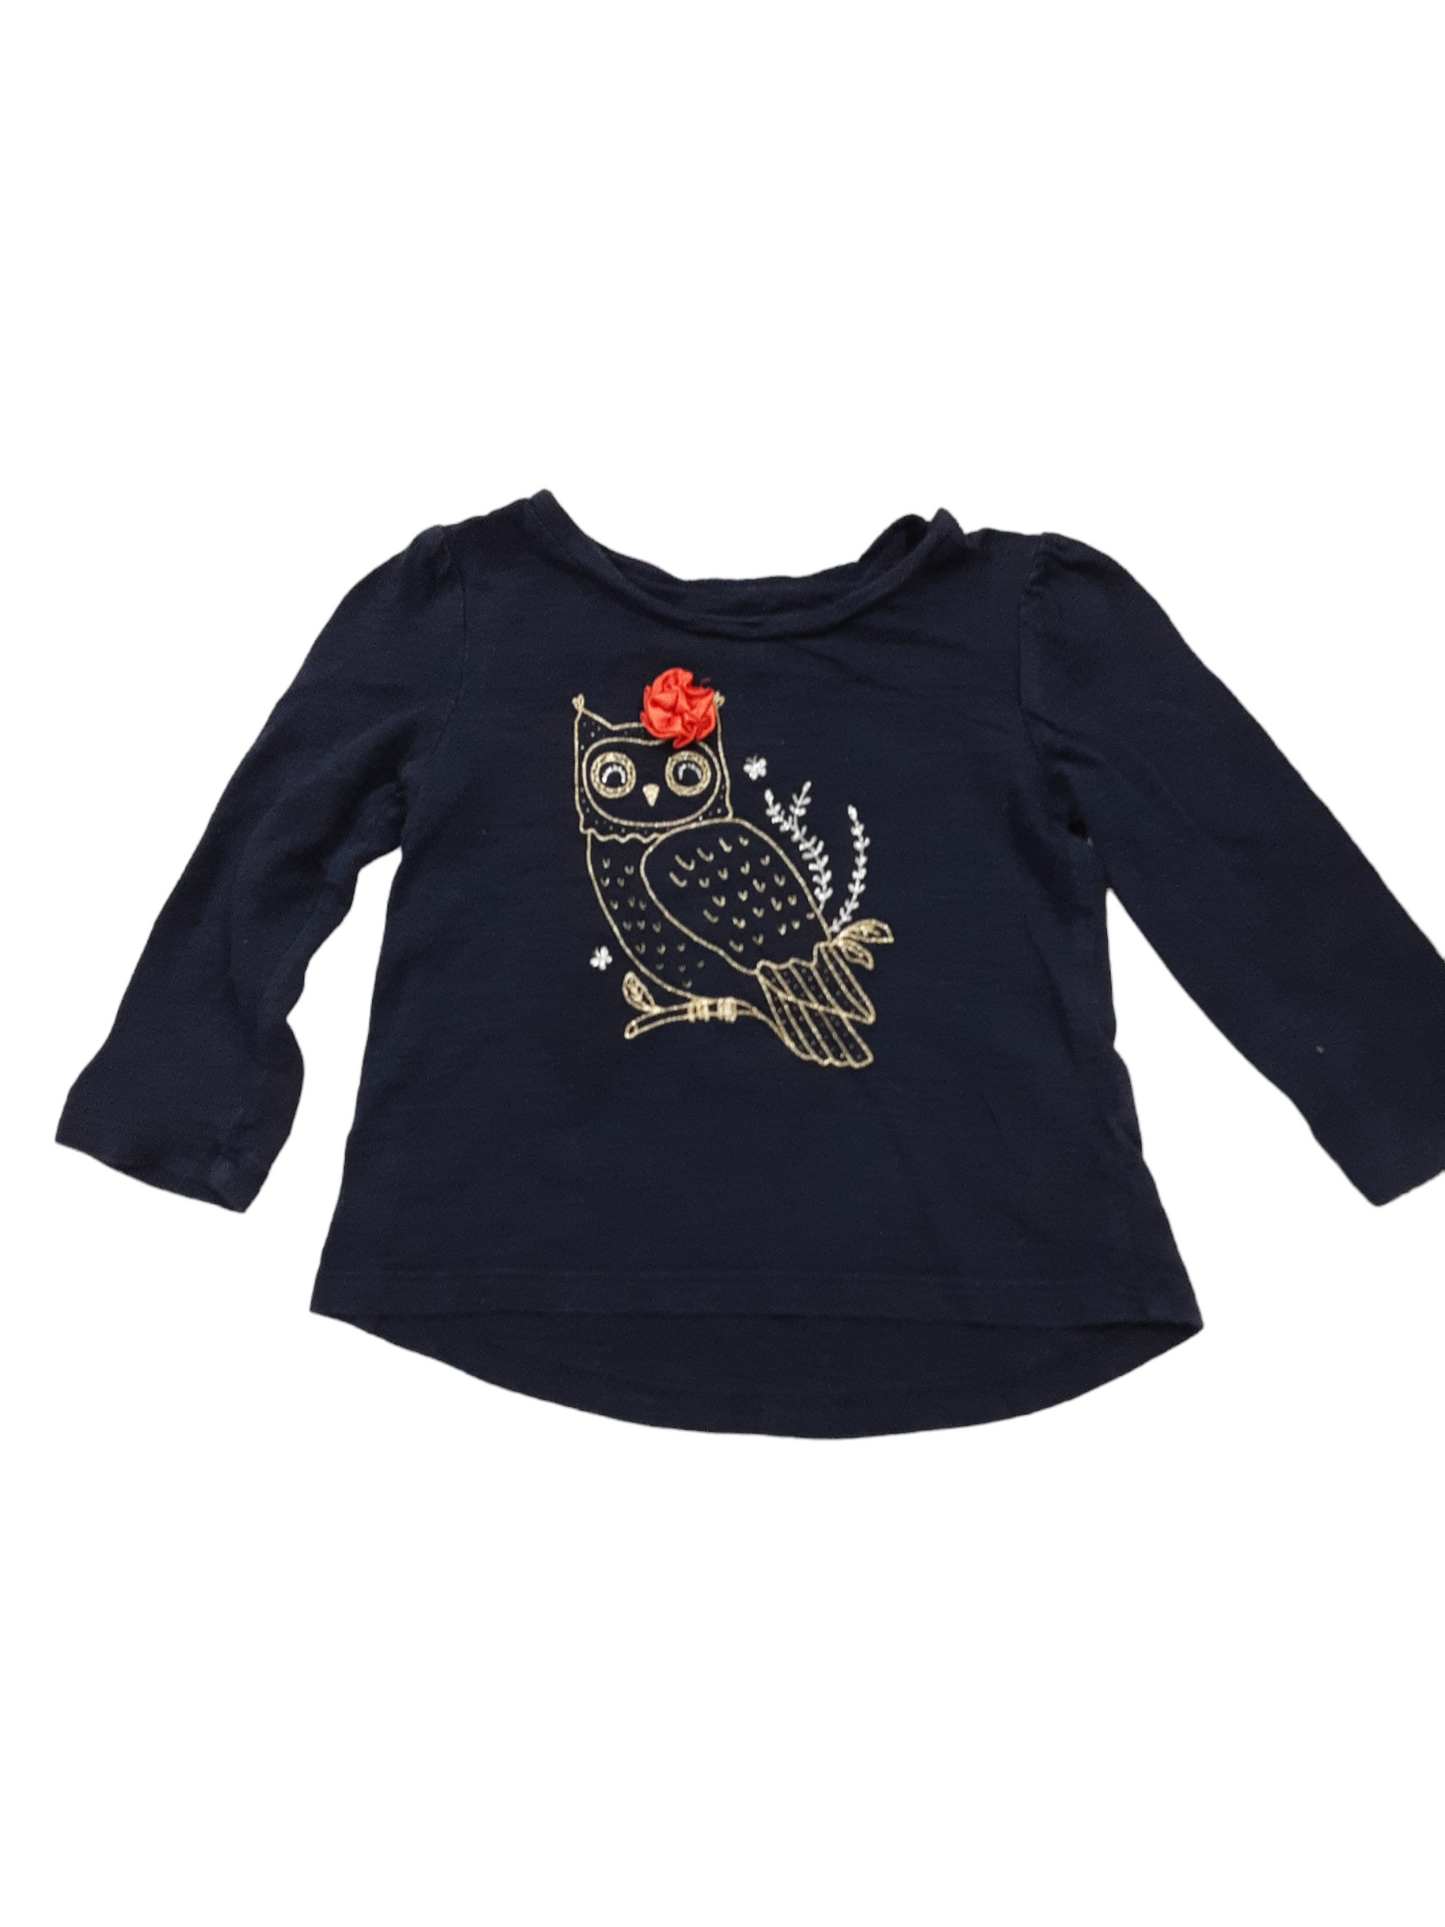 Owl top size 12-18months